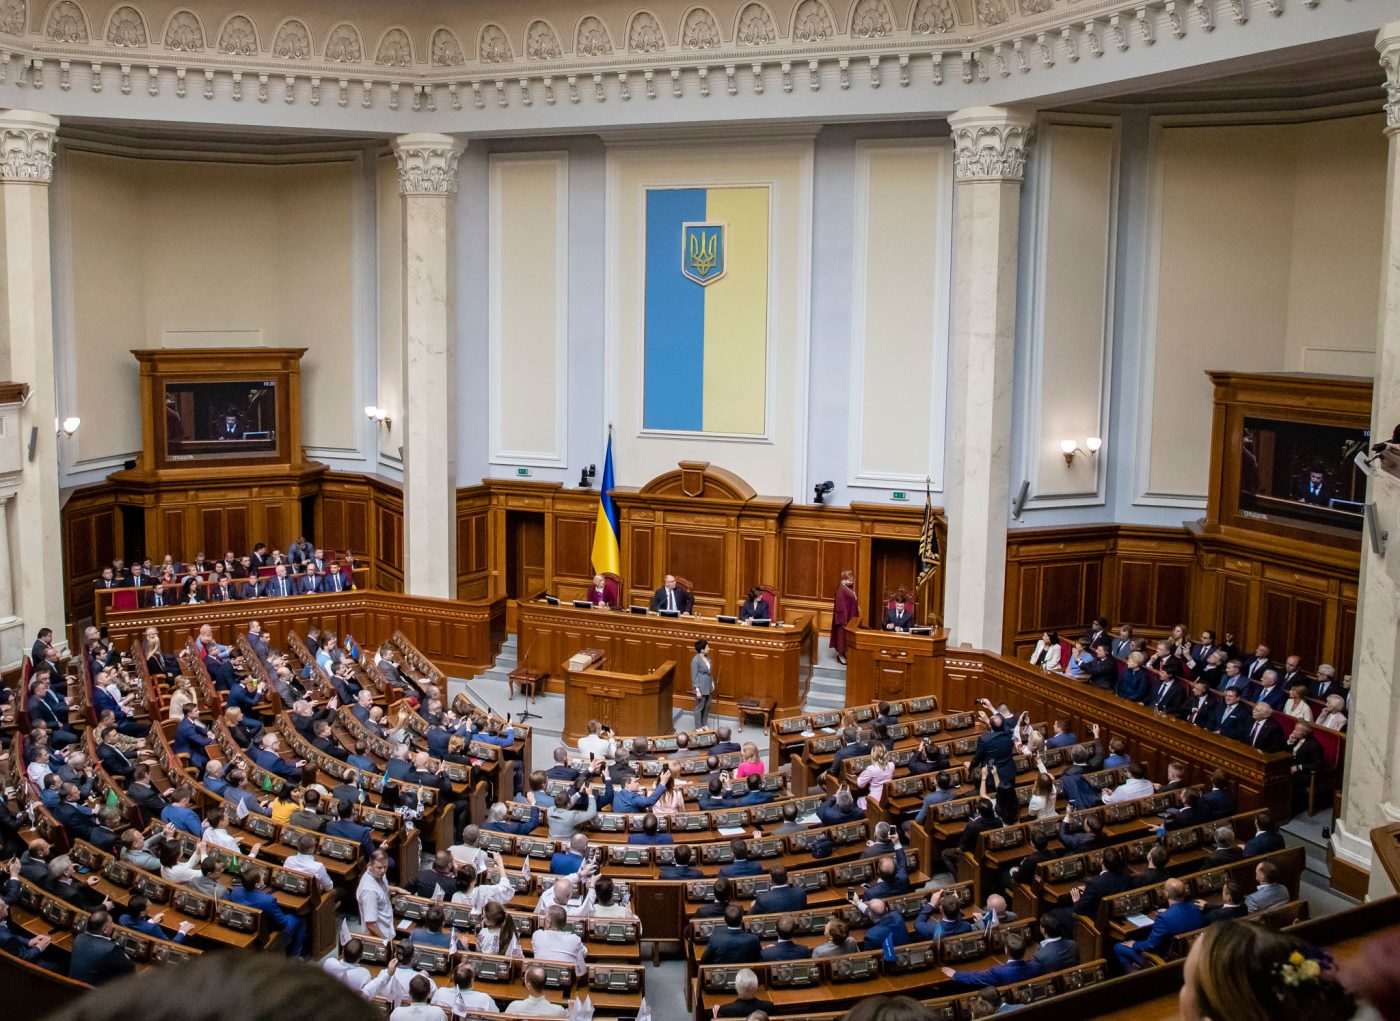 Photo: “On May 20, during the solemn session of the Verkhovna Rada in Kyiv, newly elected President of Ukraine Volodymyr Zelensky was sworn in as Head of State” by U.S. Embassy Kyiv Ukraine under CC BY-ND 2.0.